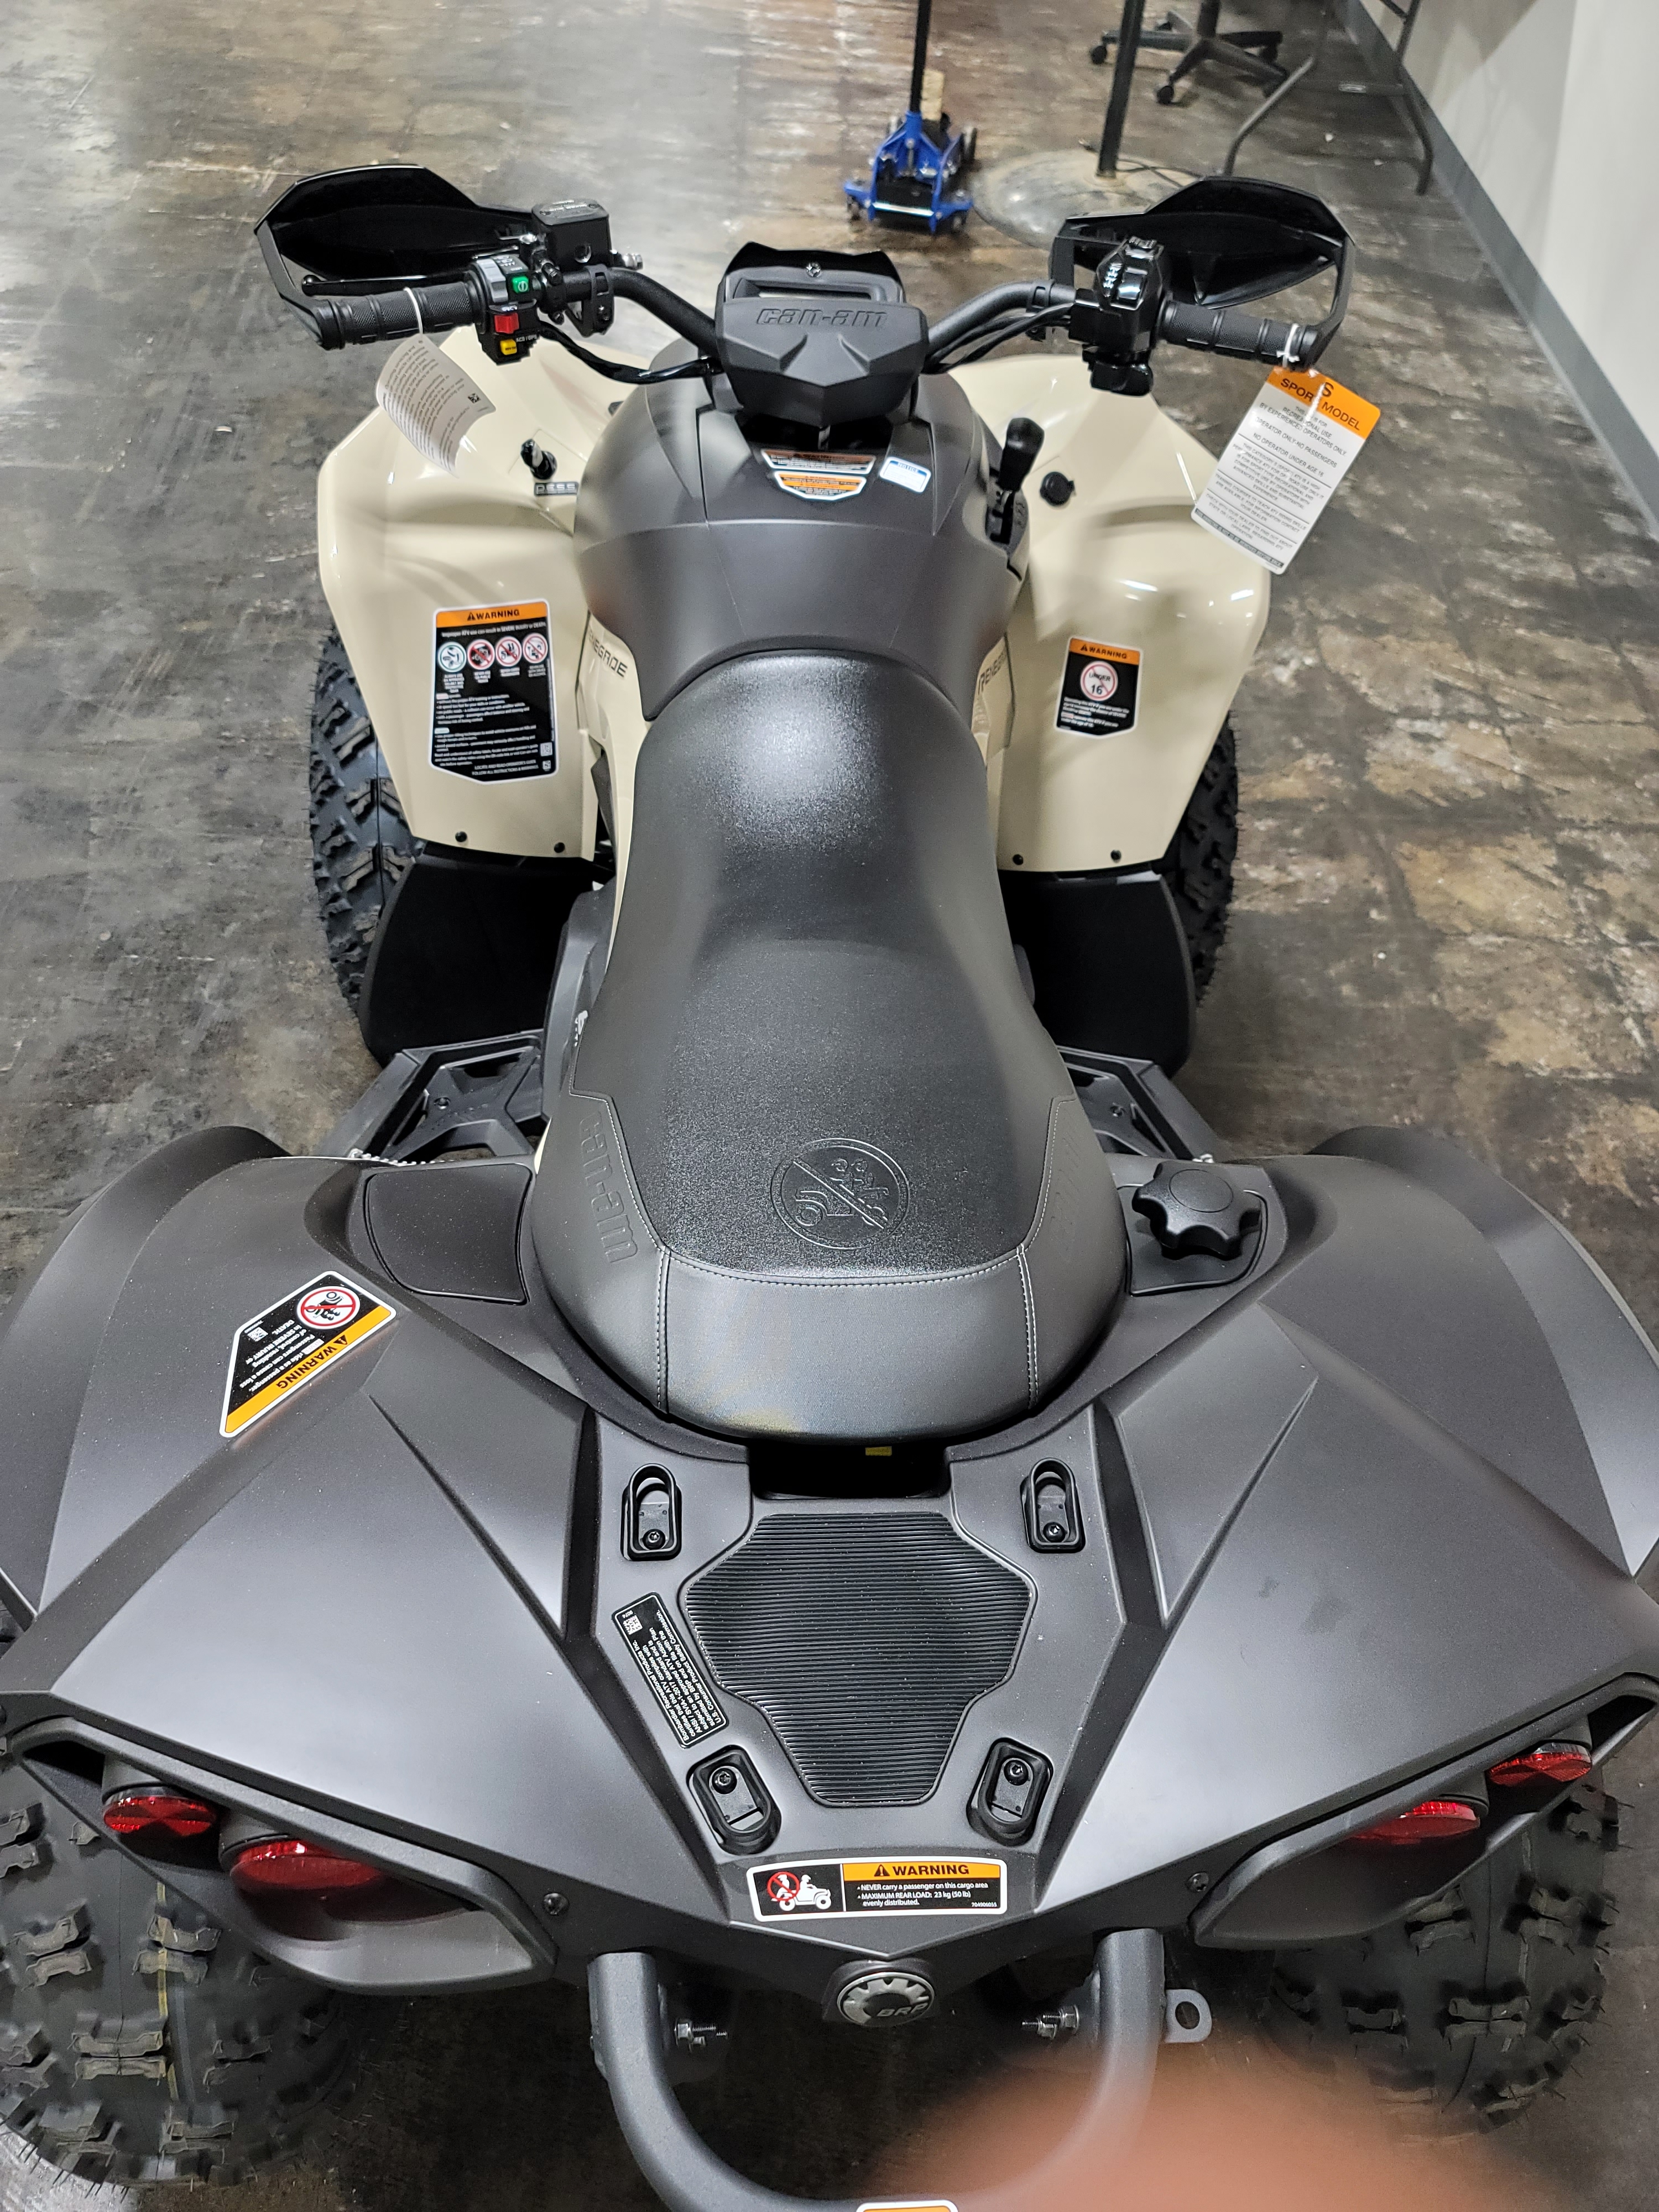 2022 Can-Am Renegade X xc 850 at Wood Powersports Harrison